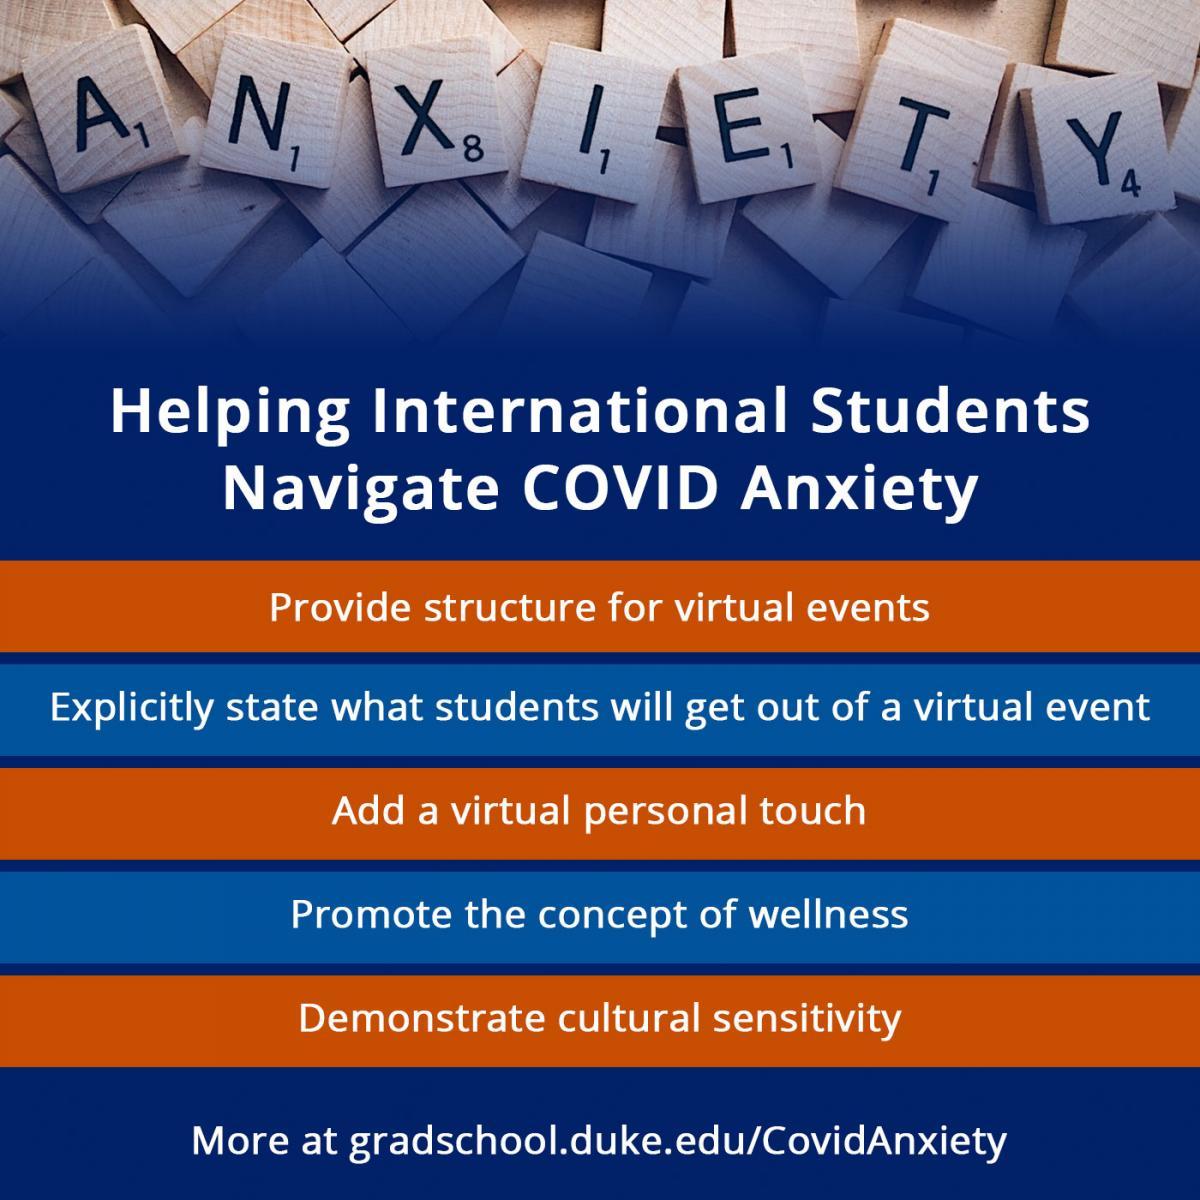 Tips to help international students navigate COVID anxiety